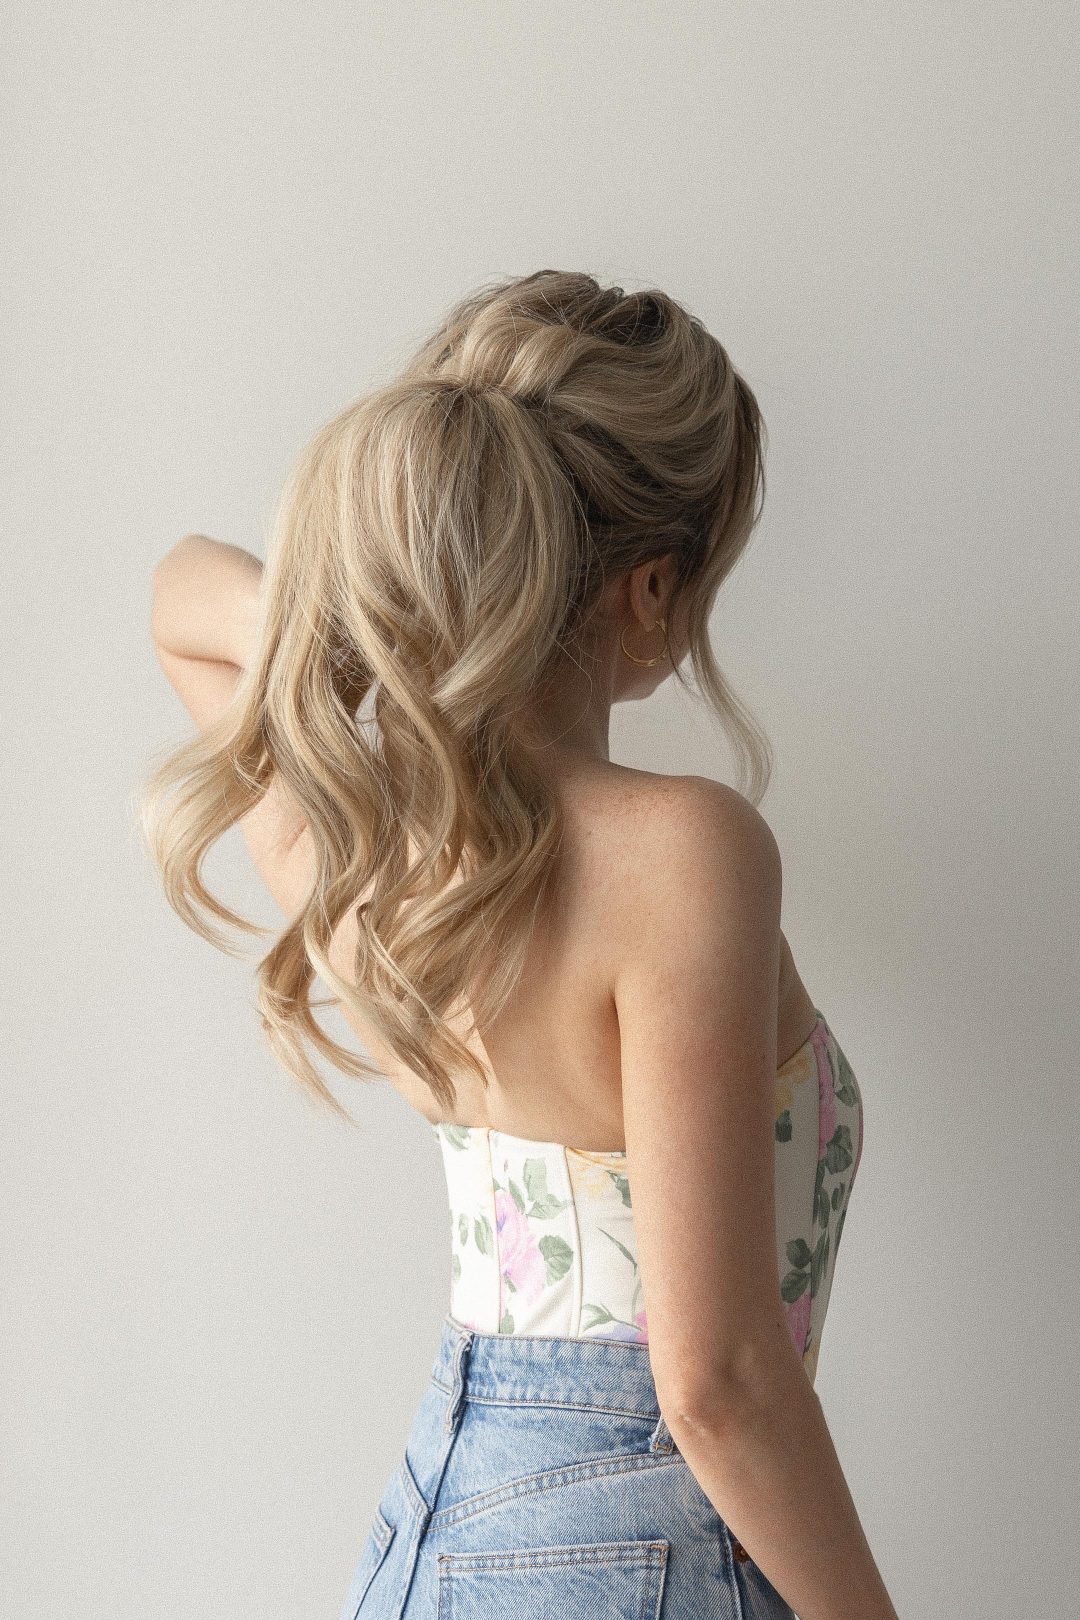 Easy Ponytail Hairstyle for Prom | Medium - Long Hair